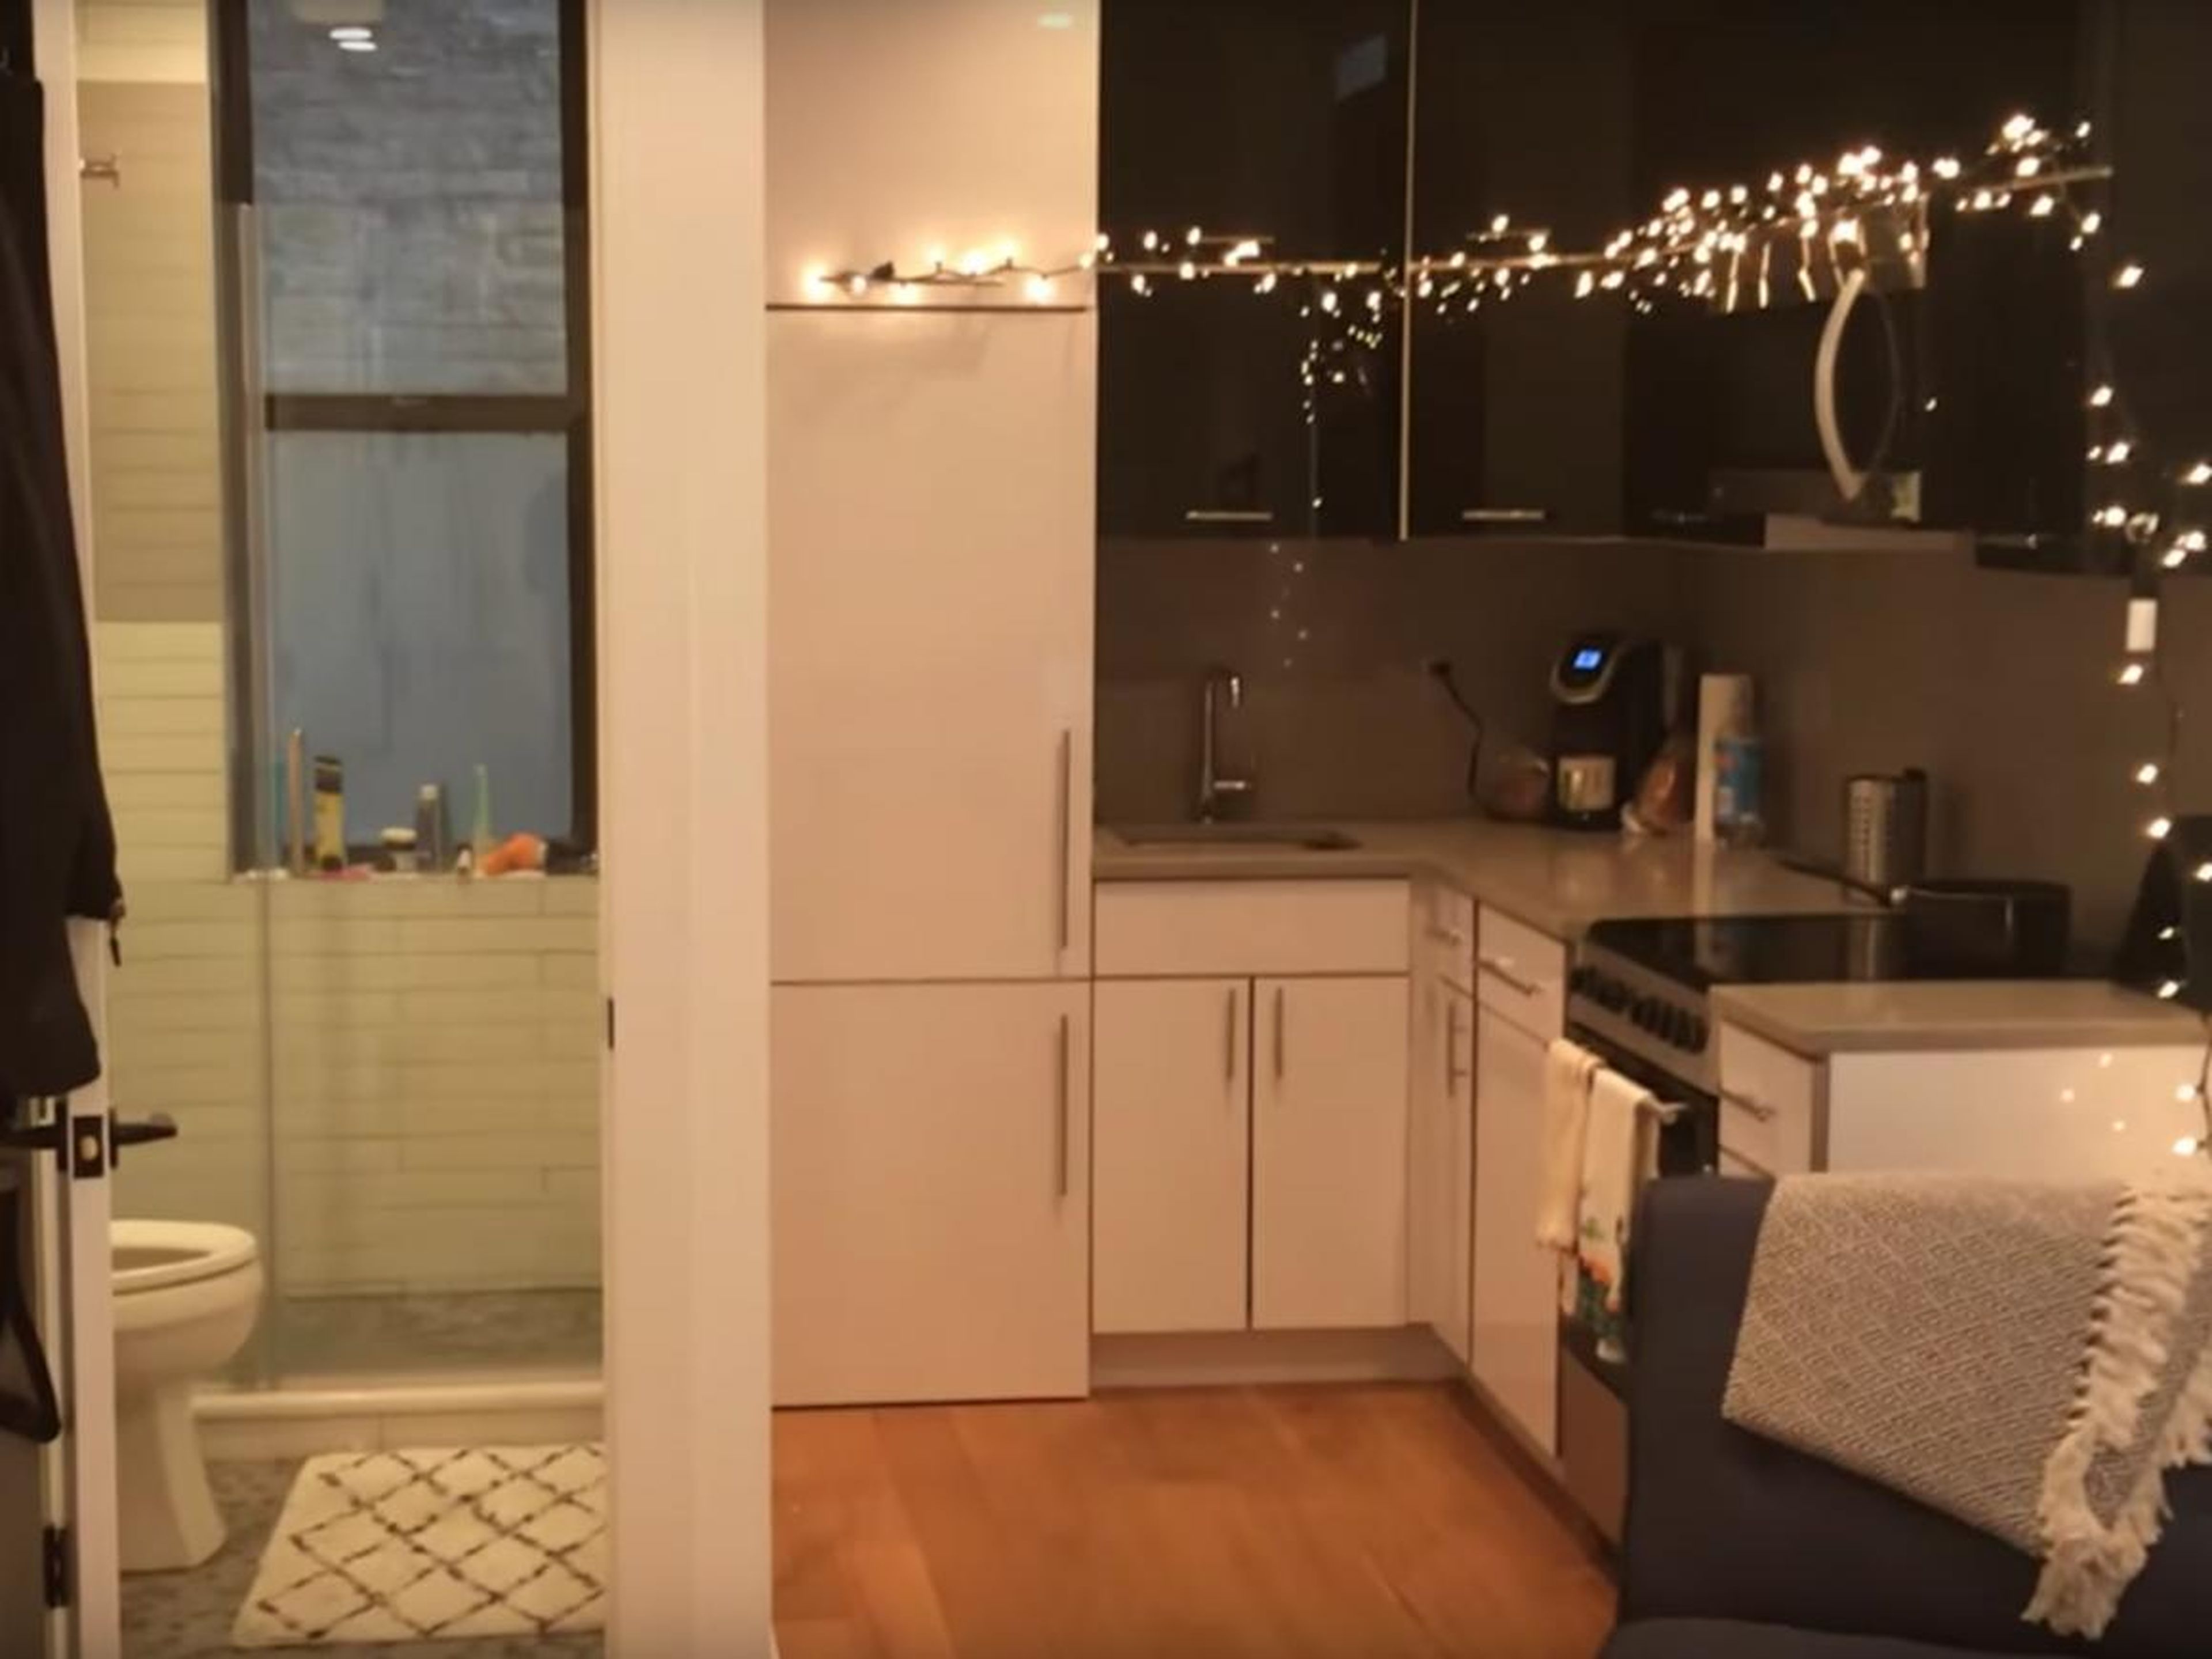 But space is just something you have to sacrifice sometimes if you're going to live in New York. The YouTuber Chris Buell said he paid $2,600 a month for this 350-square-foot apartment in an undisclosed New York City neighborhood.